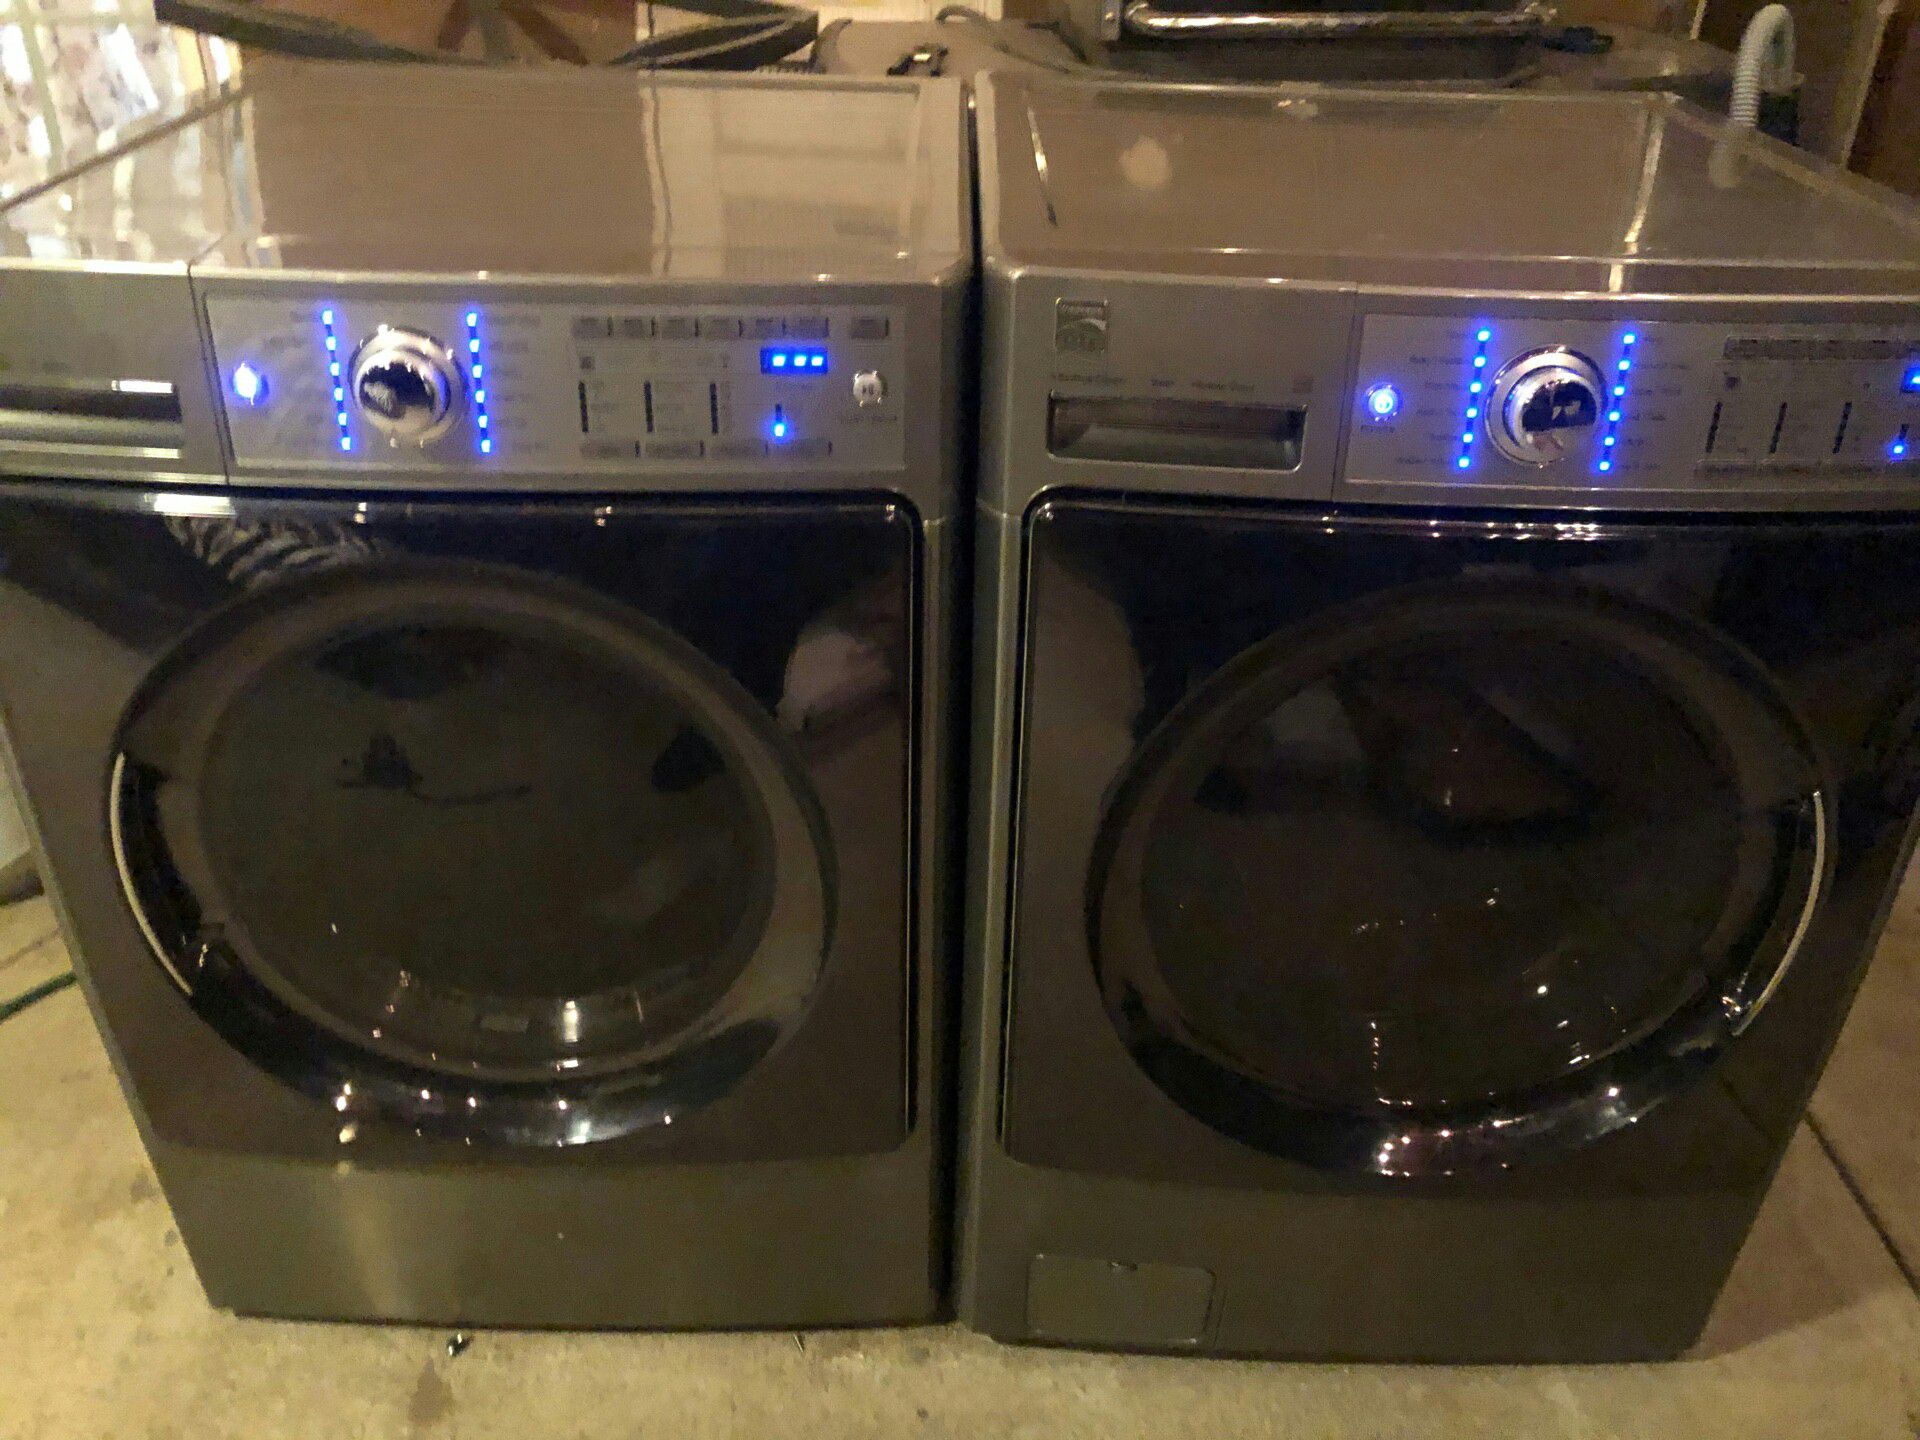 1yr old Kenmore elite washer and gas dryer made by LG this units are Kenmore top of the line